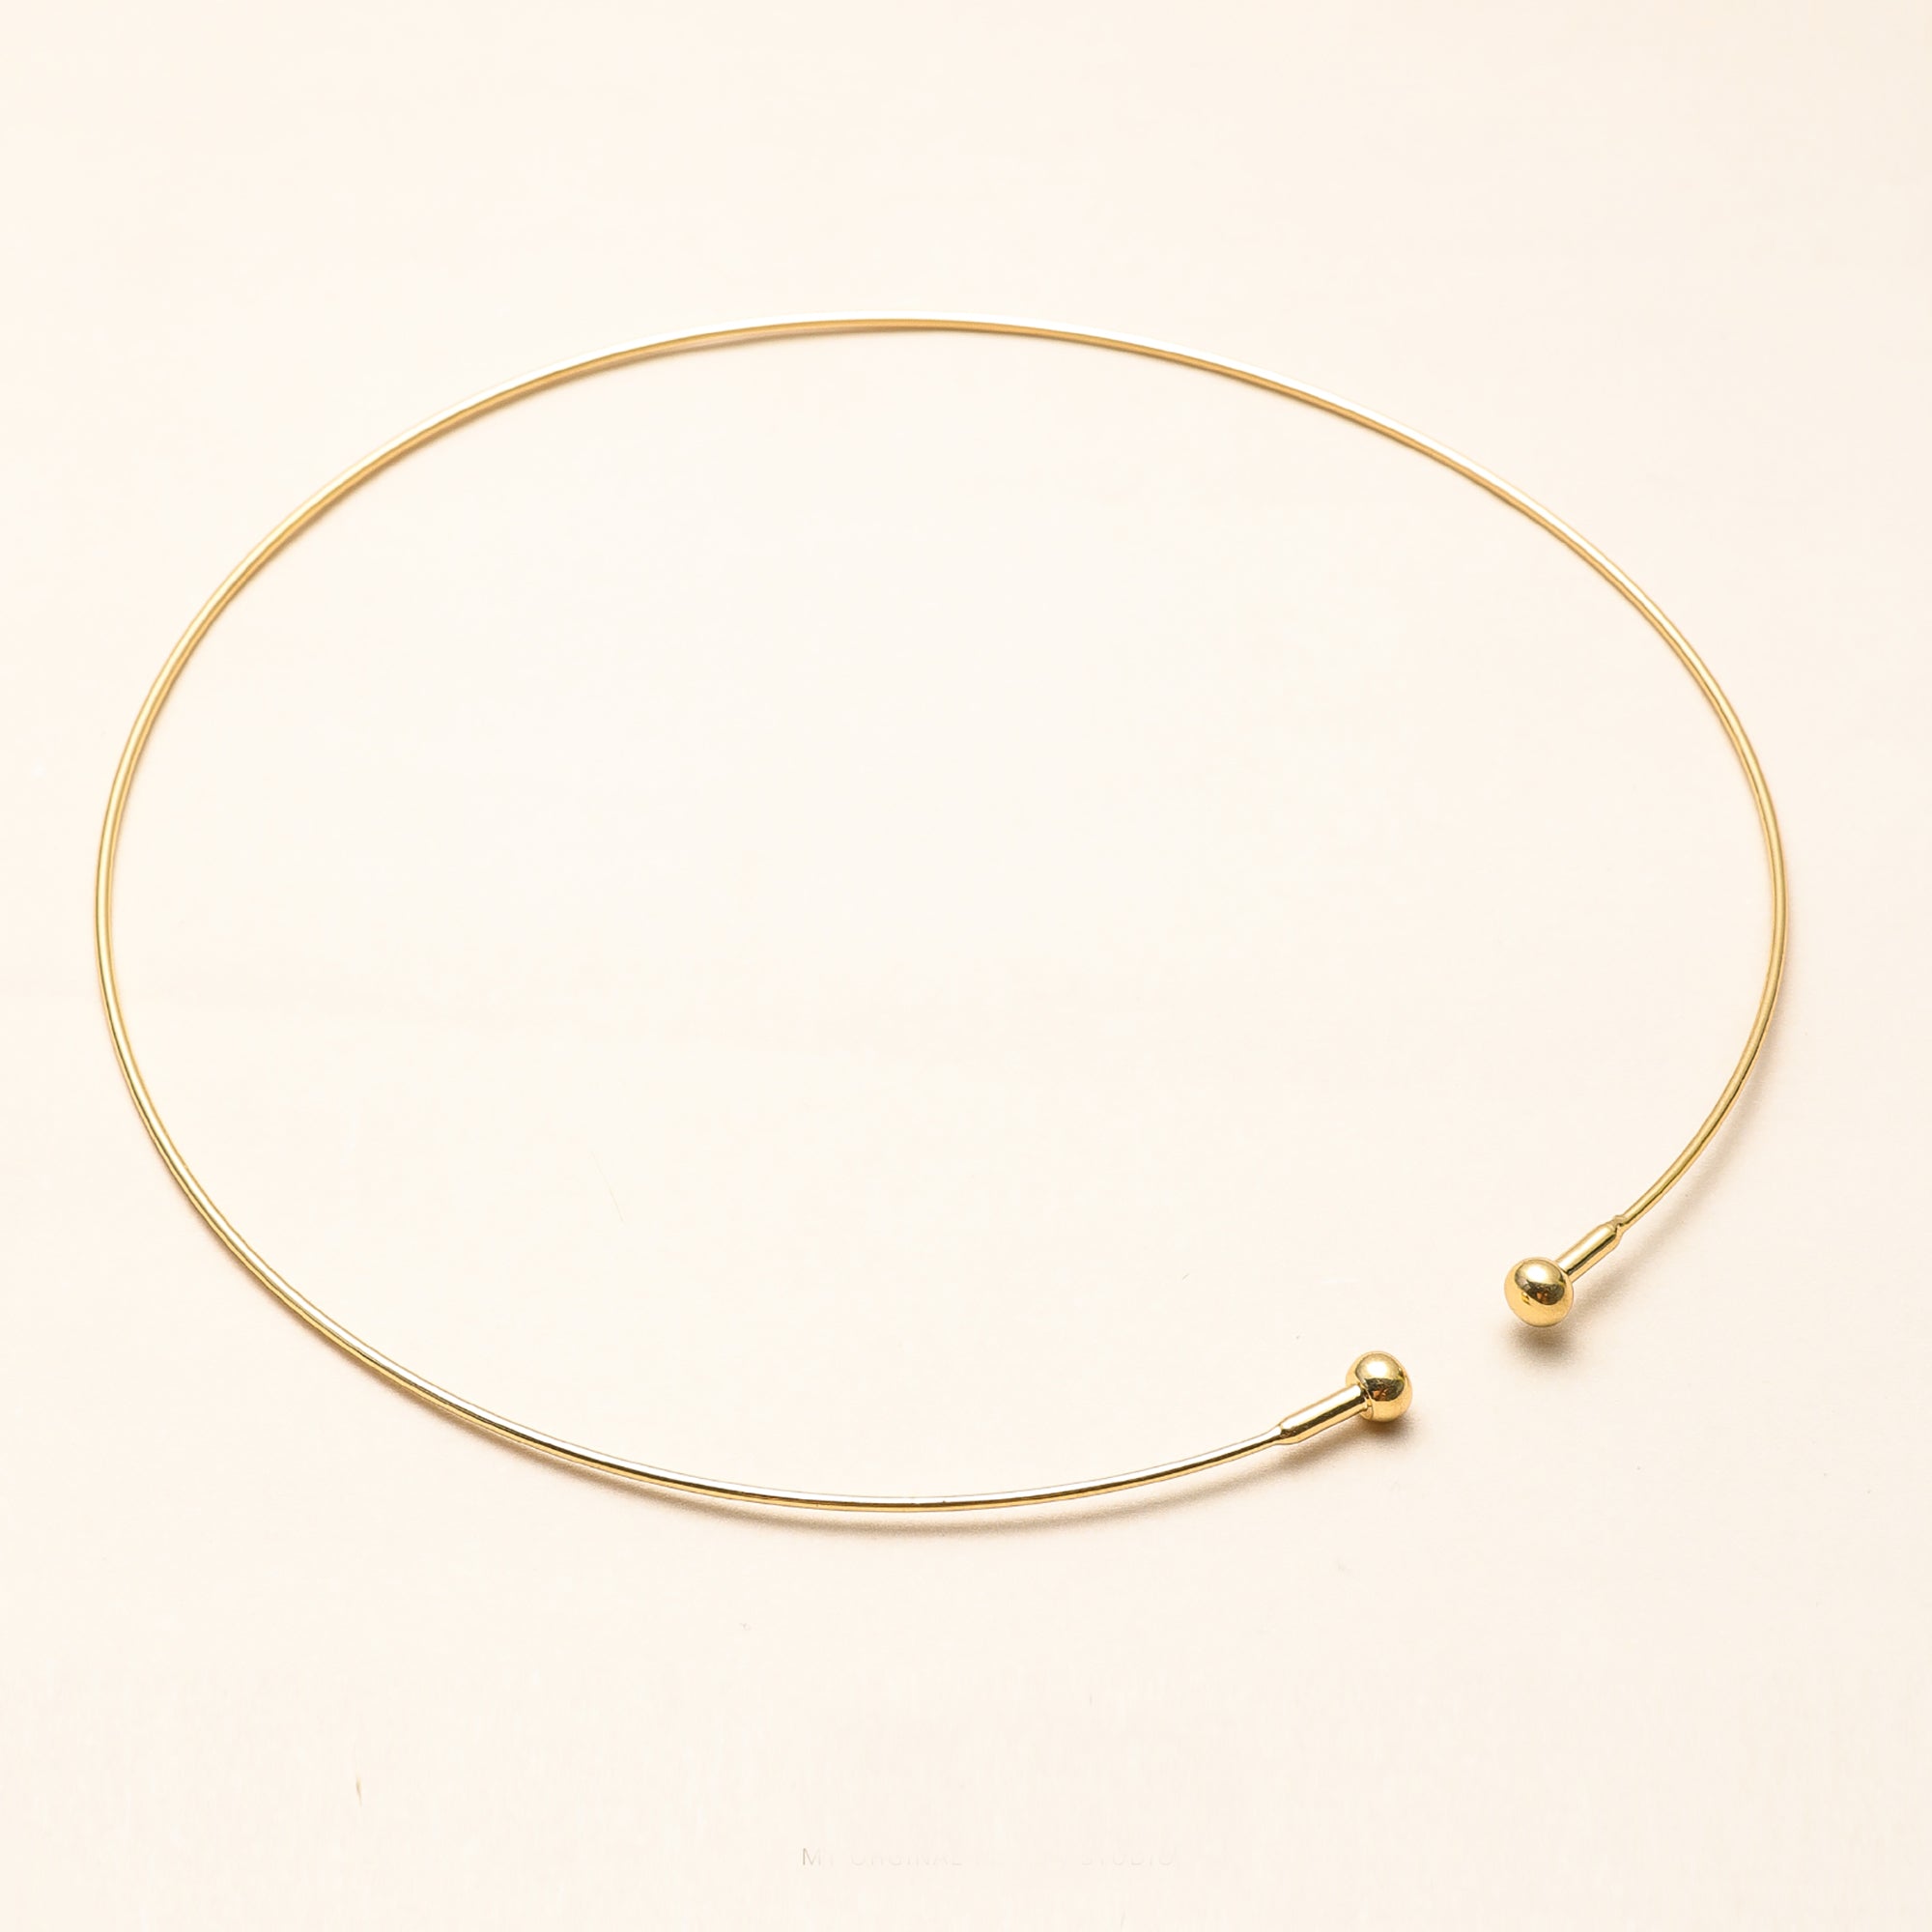 Gold Plated Choker Necklace Gift wedding influencer styling KOL / Youtuber / Celebrity / Fashion Icon picked